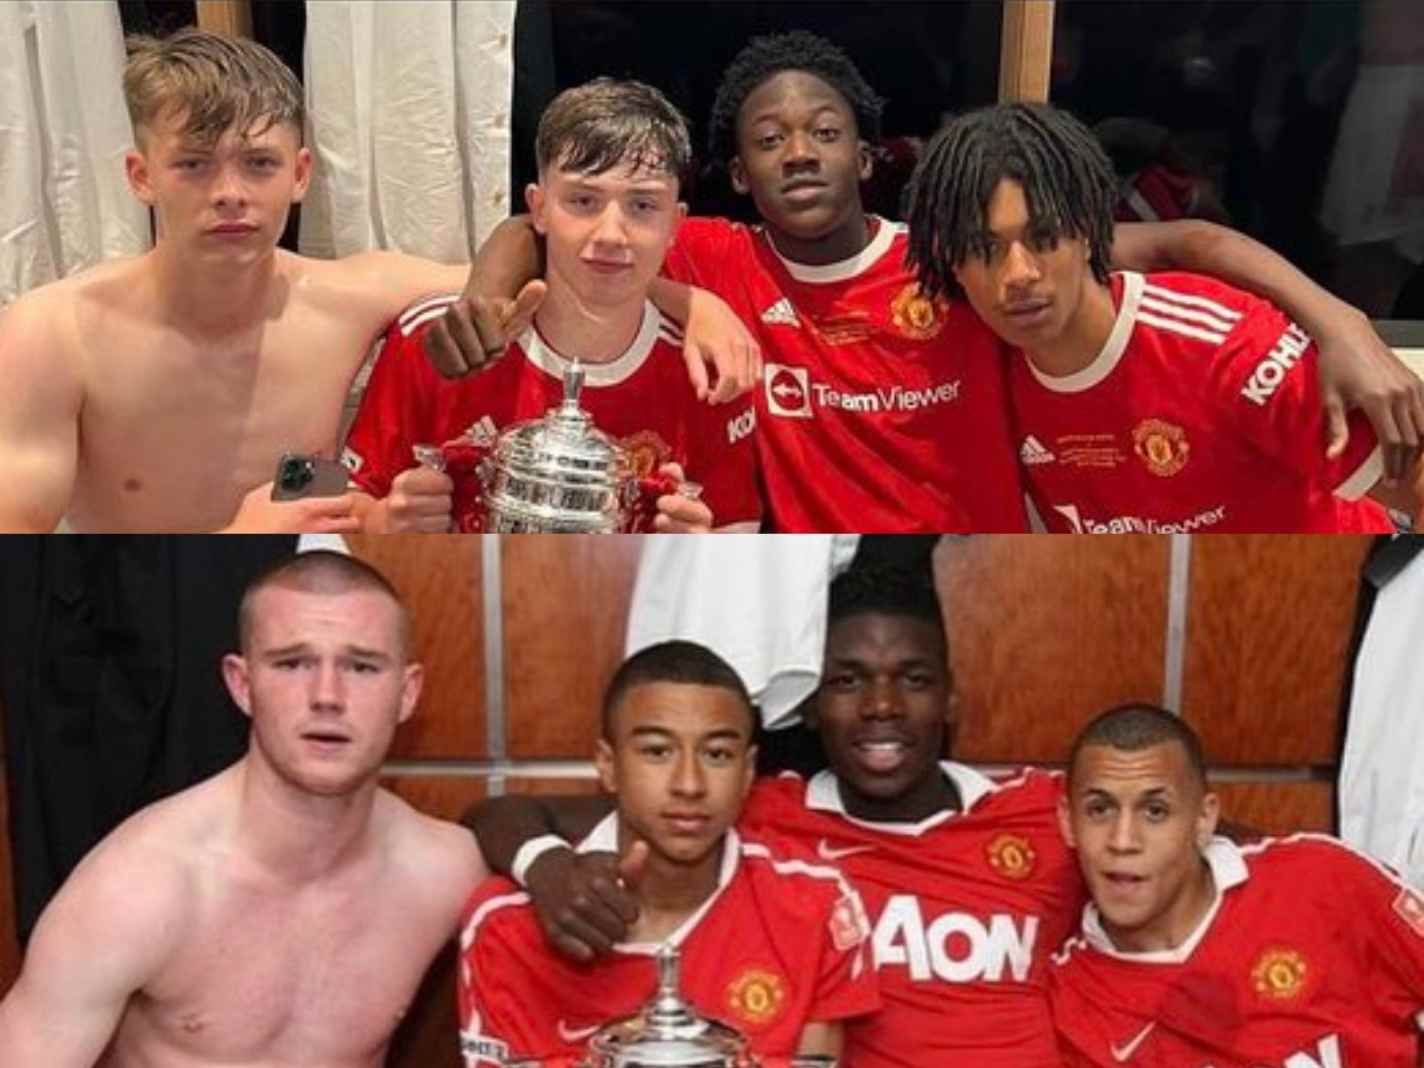 In this image - Man United U18 side recreating photo featuring the likes of Jesse Lingard, Paul Pogba and Ravel Morrison